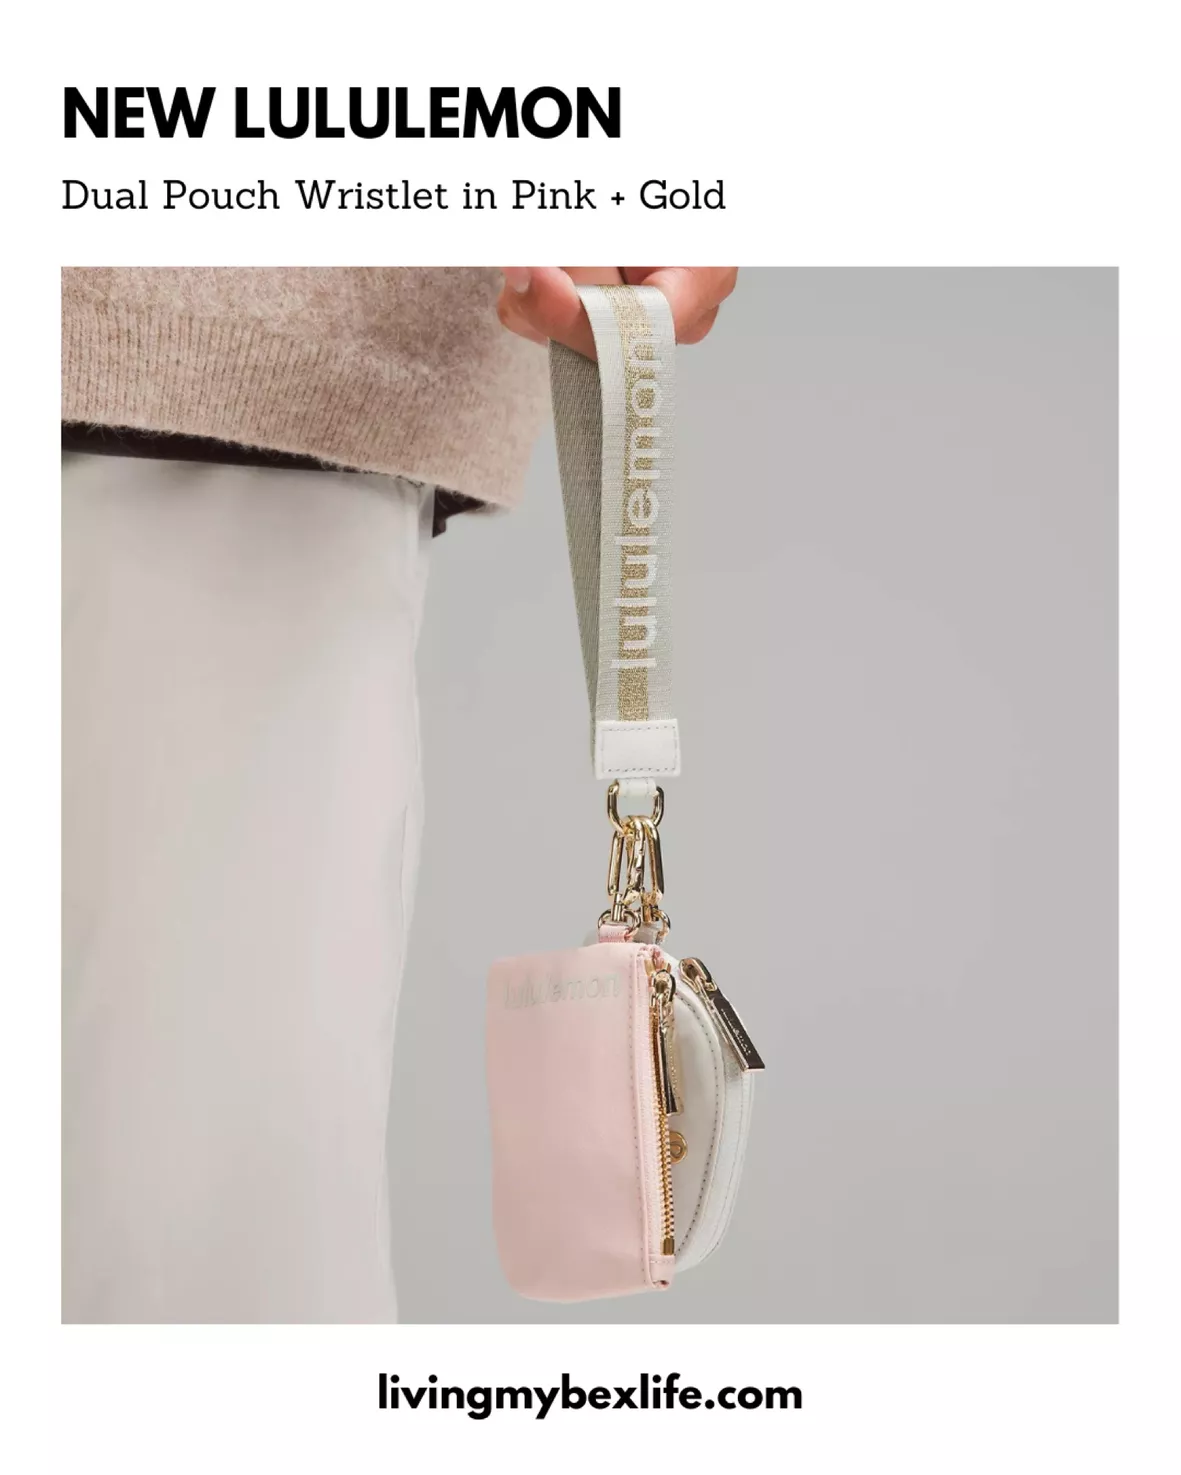 Dual Pouch Wristlet curated on LTK